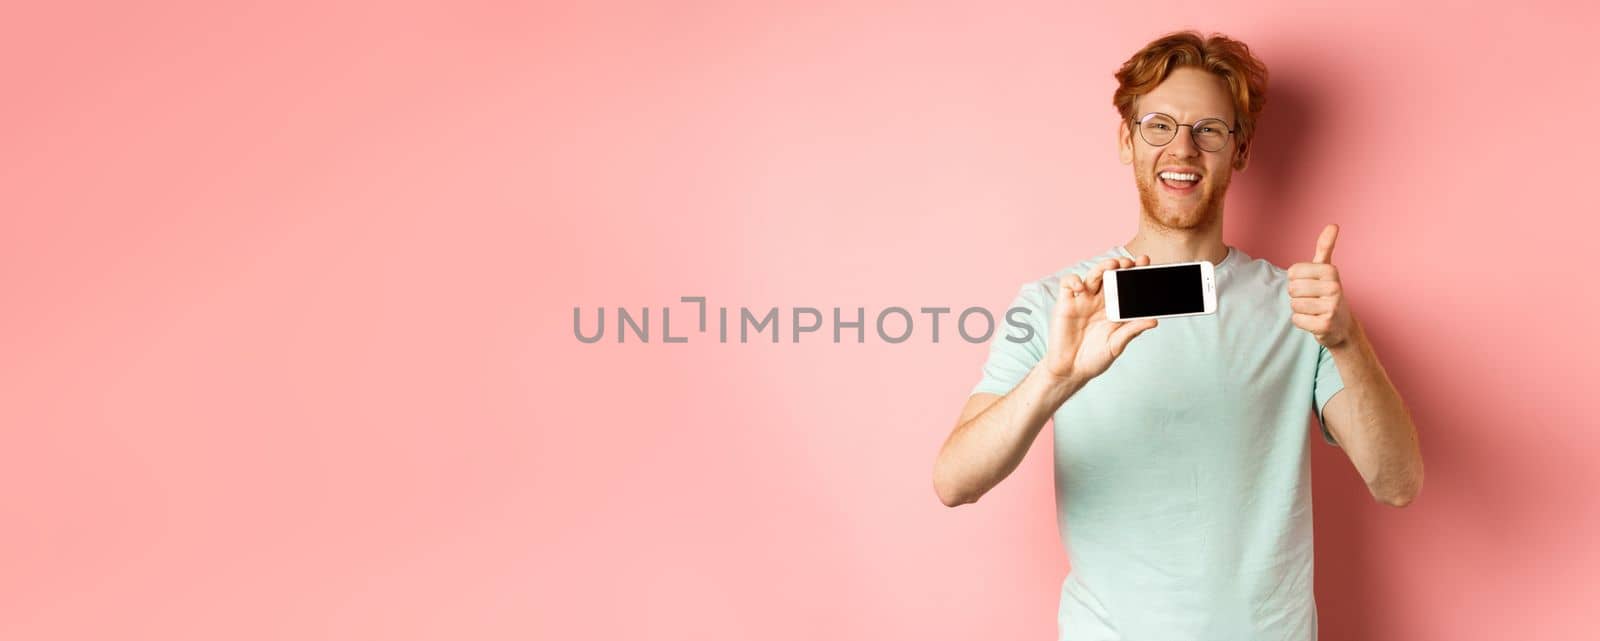 Happy european man with ginger hair and glasses, showing mobile blank screen horizontally and thumbs-up, recommend online promo, pink background.